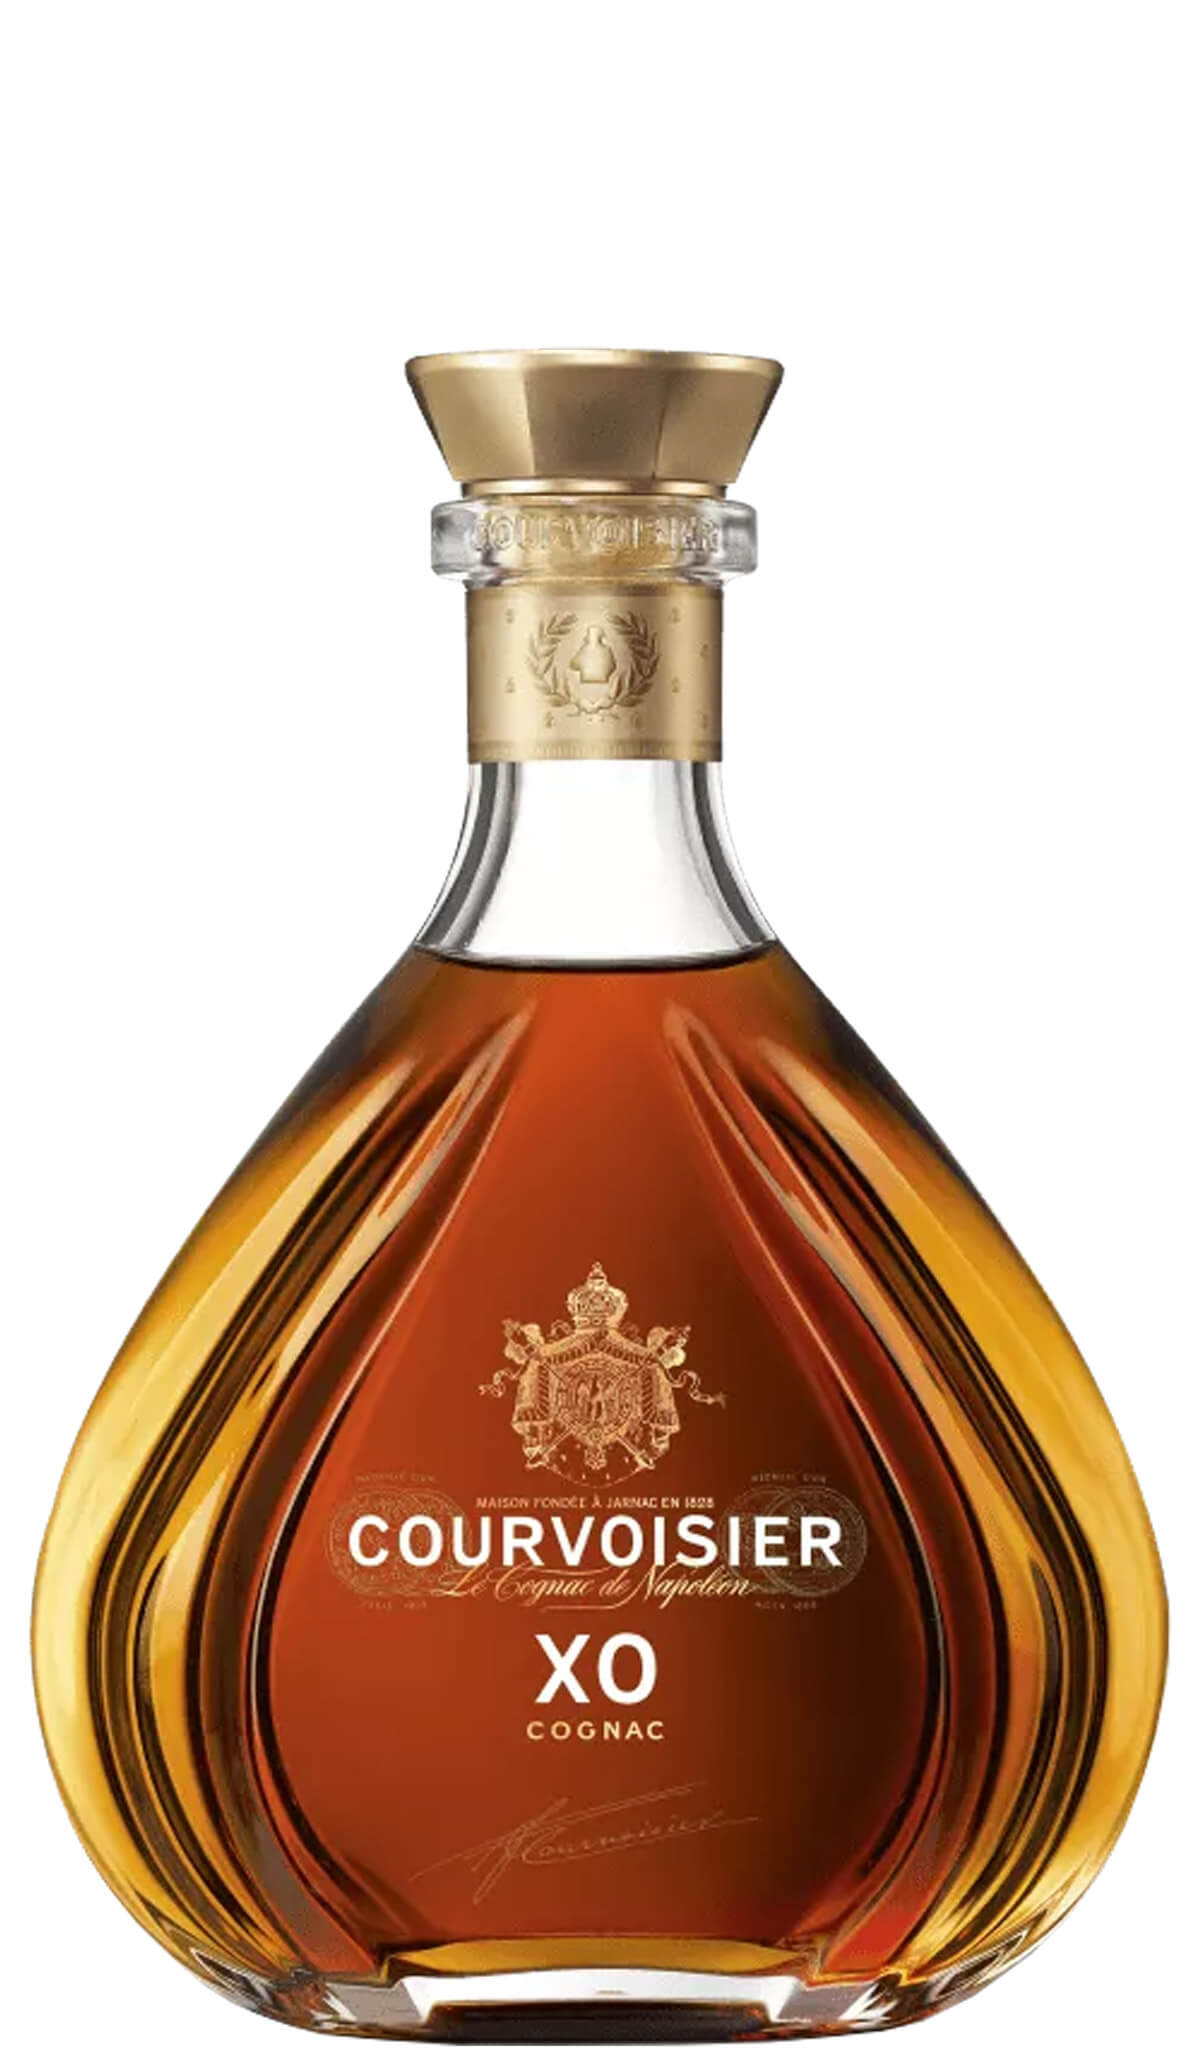 Find out more, explore the range and buy Courvoisier XO Cognac 700mL available online at Wine Sellers Direct - Australia's independent liquor specialists.